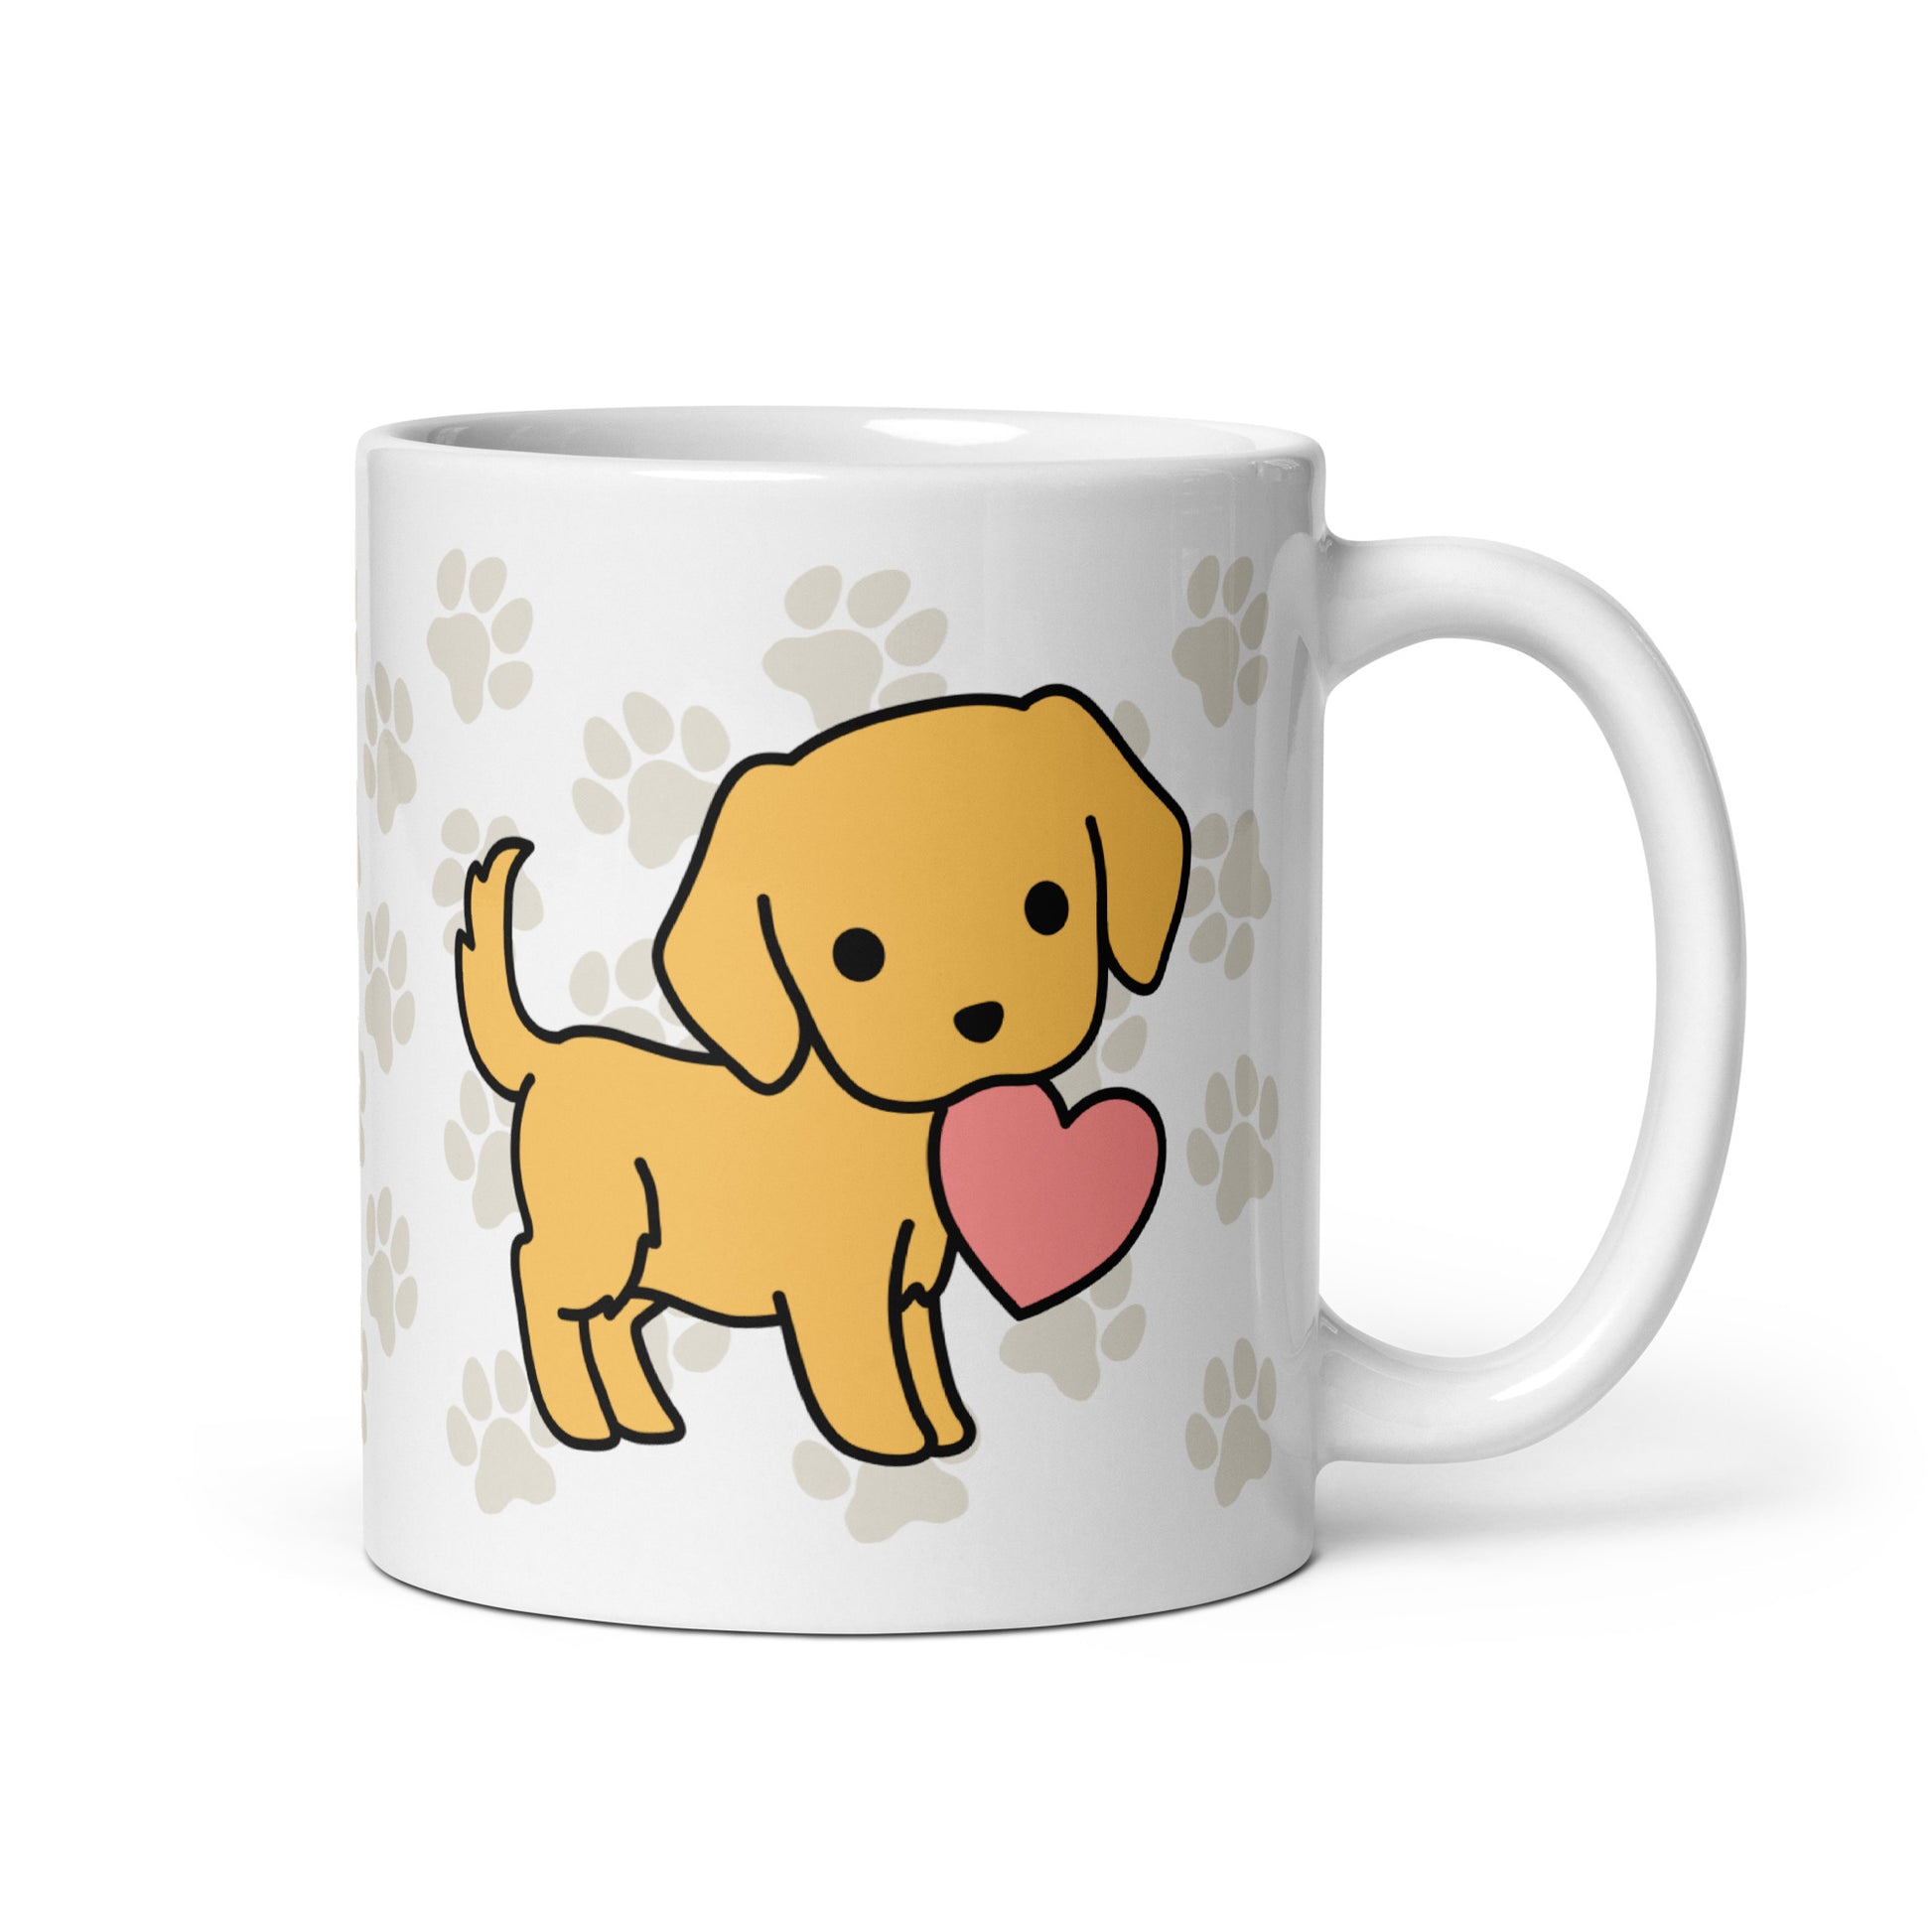 A white 11 ounce ceramic mug with a pattern of light brown pawprints all over. The mug also features a stylized illustration of a Golden Retriever holding a heart in its mouth.